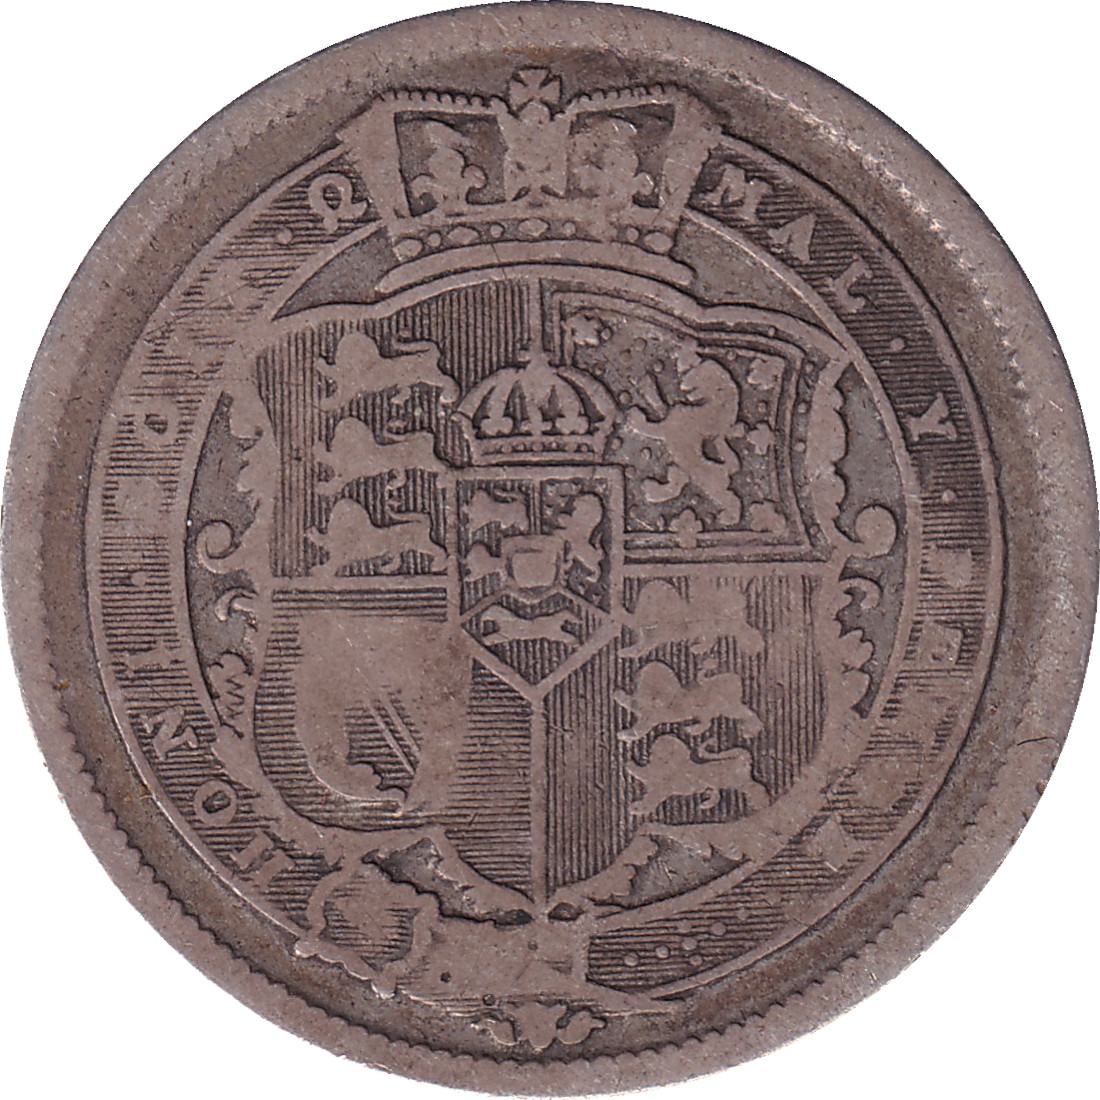 1 shilling - Georges III - Old head